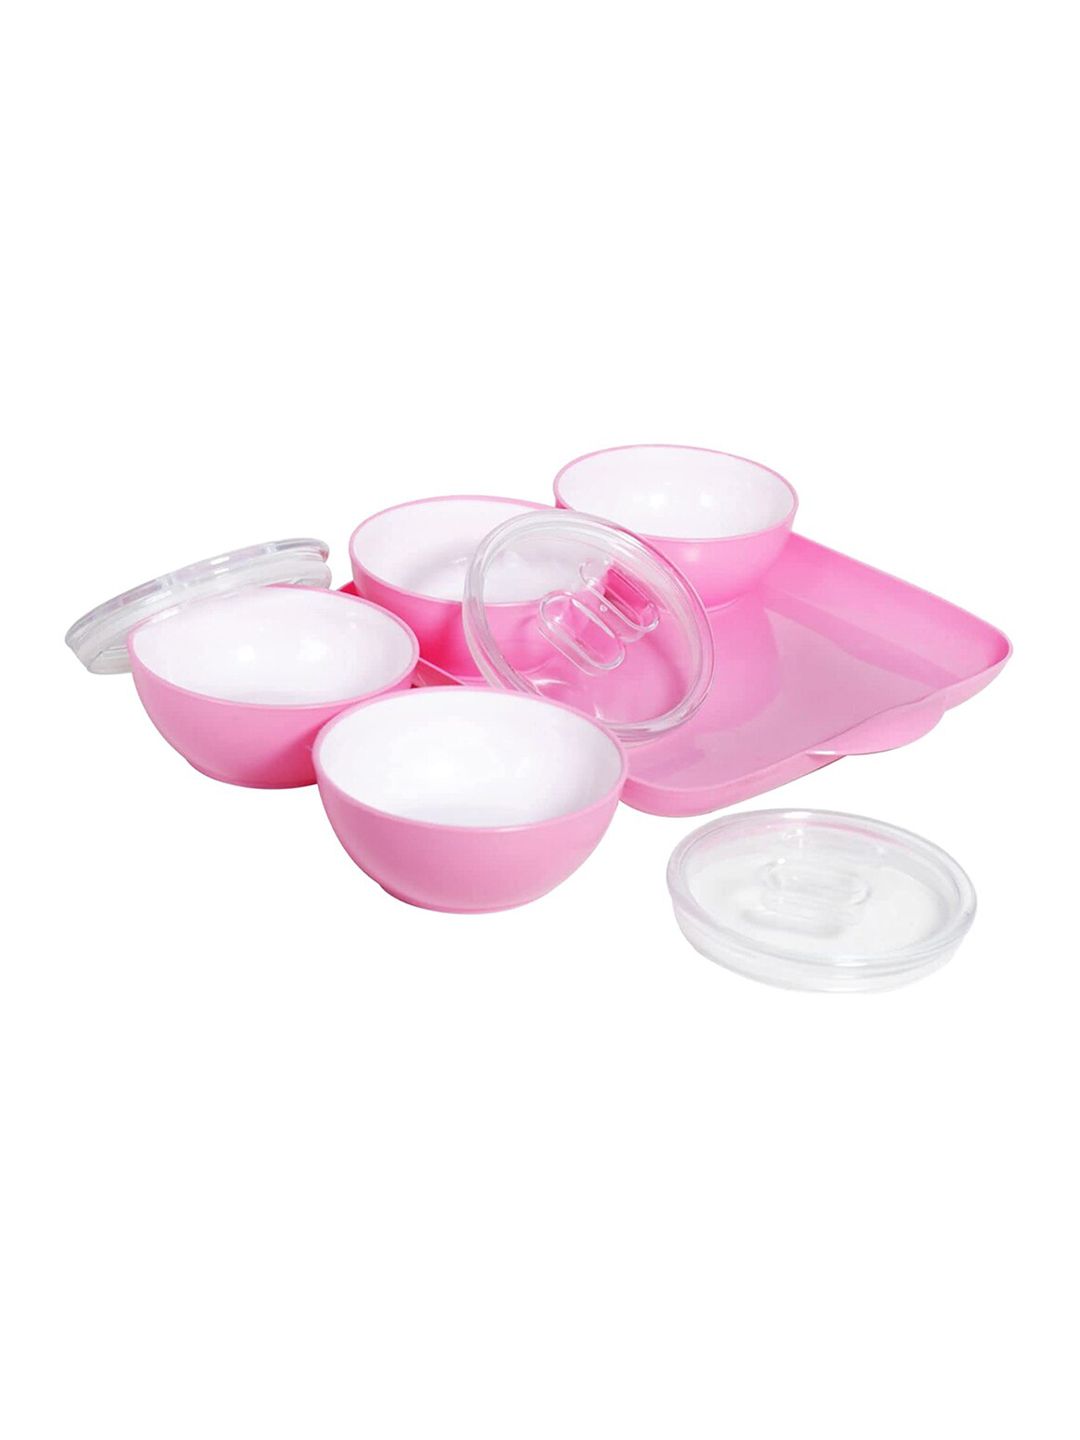 Kuber Industries Set of 5 Pink Bowls & Tray Price in India